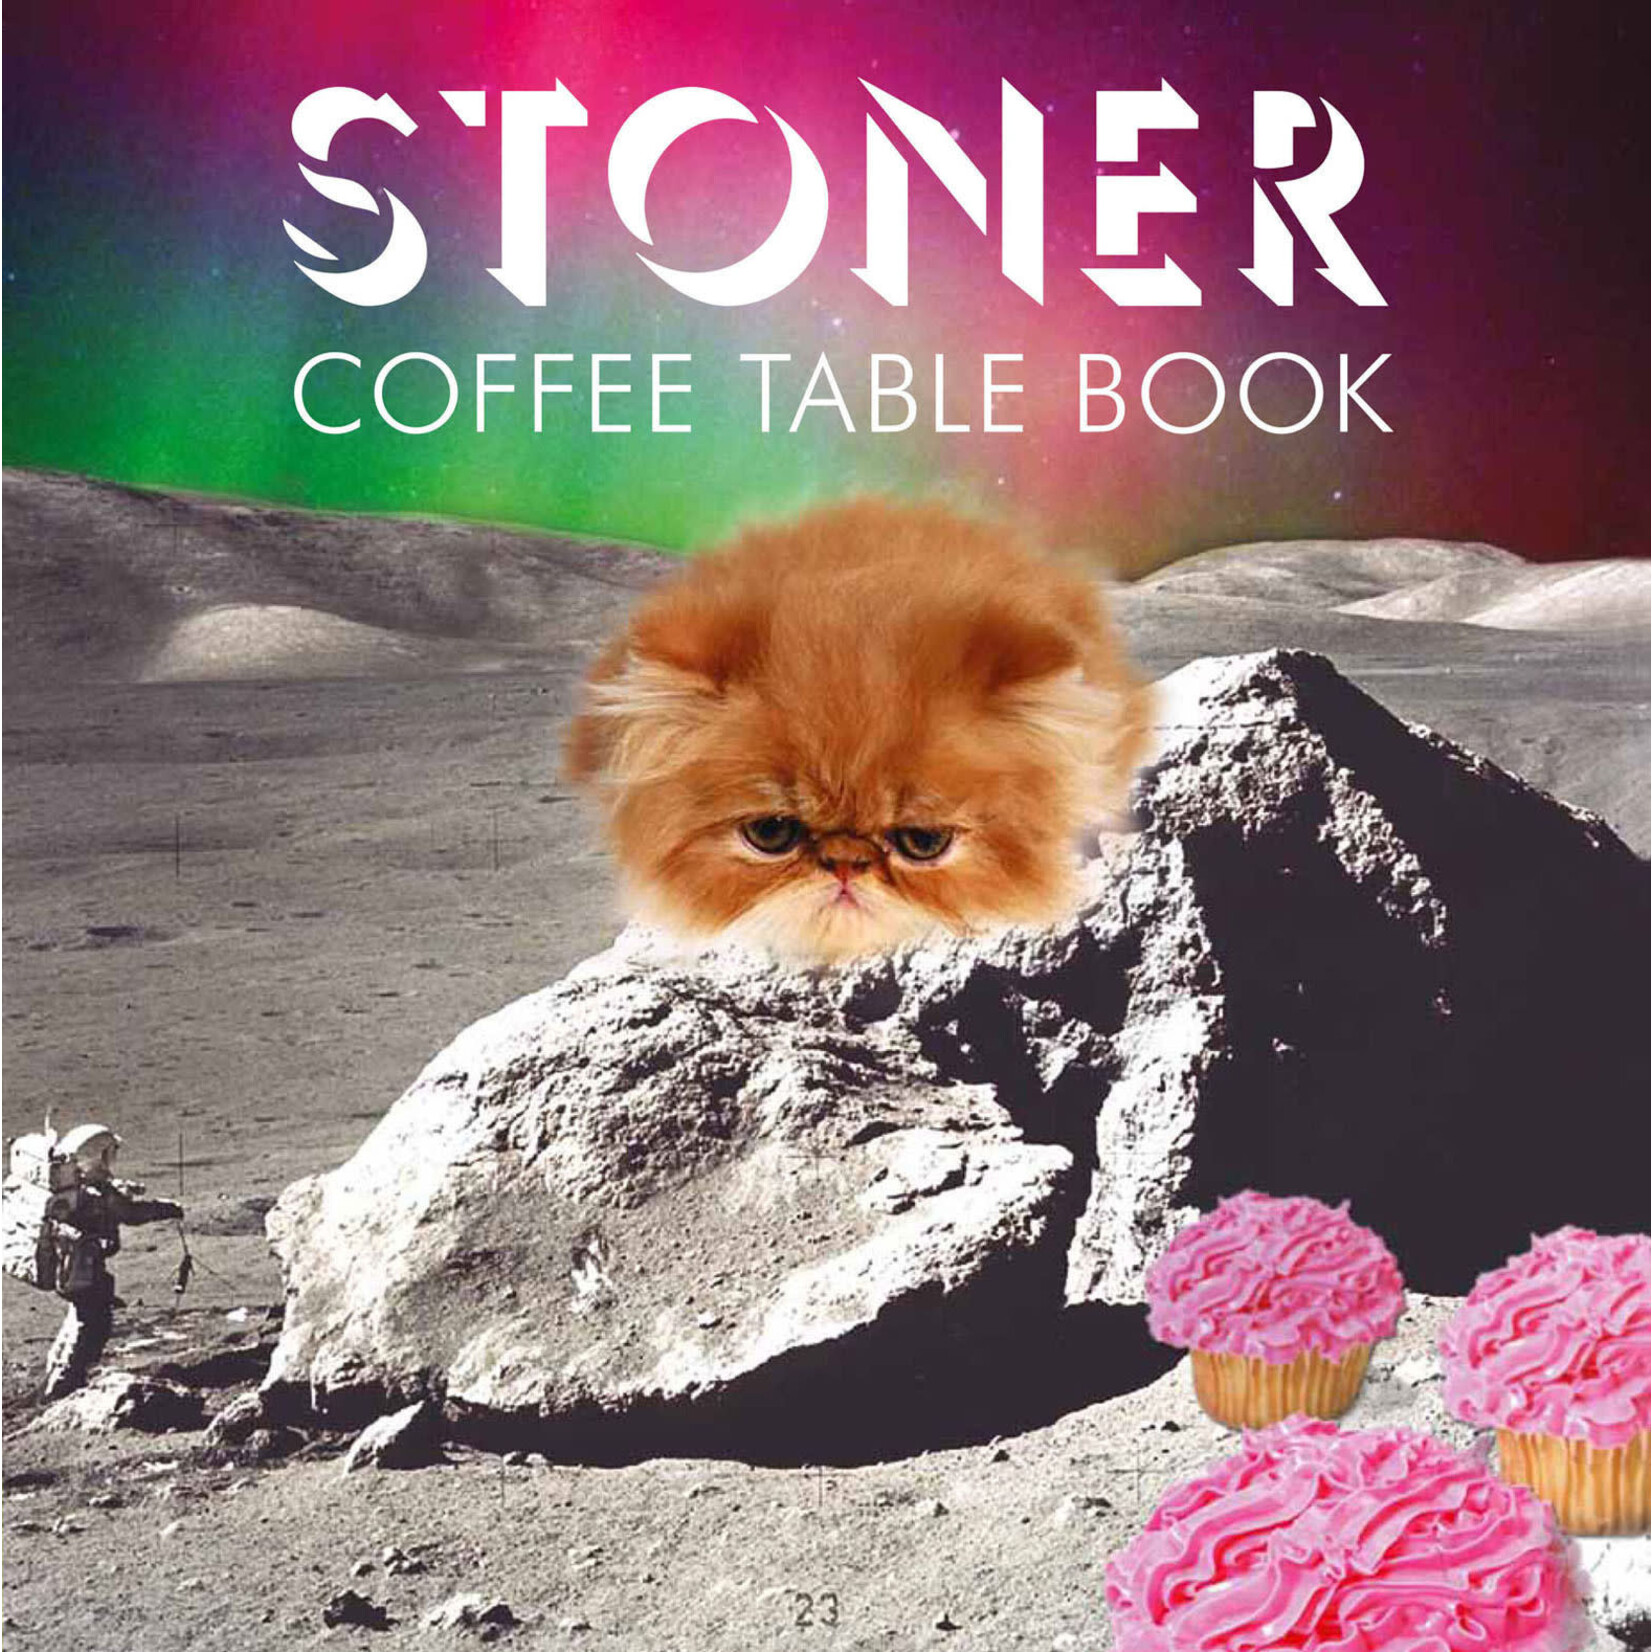 Book - Stoner Coffee Table Book